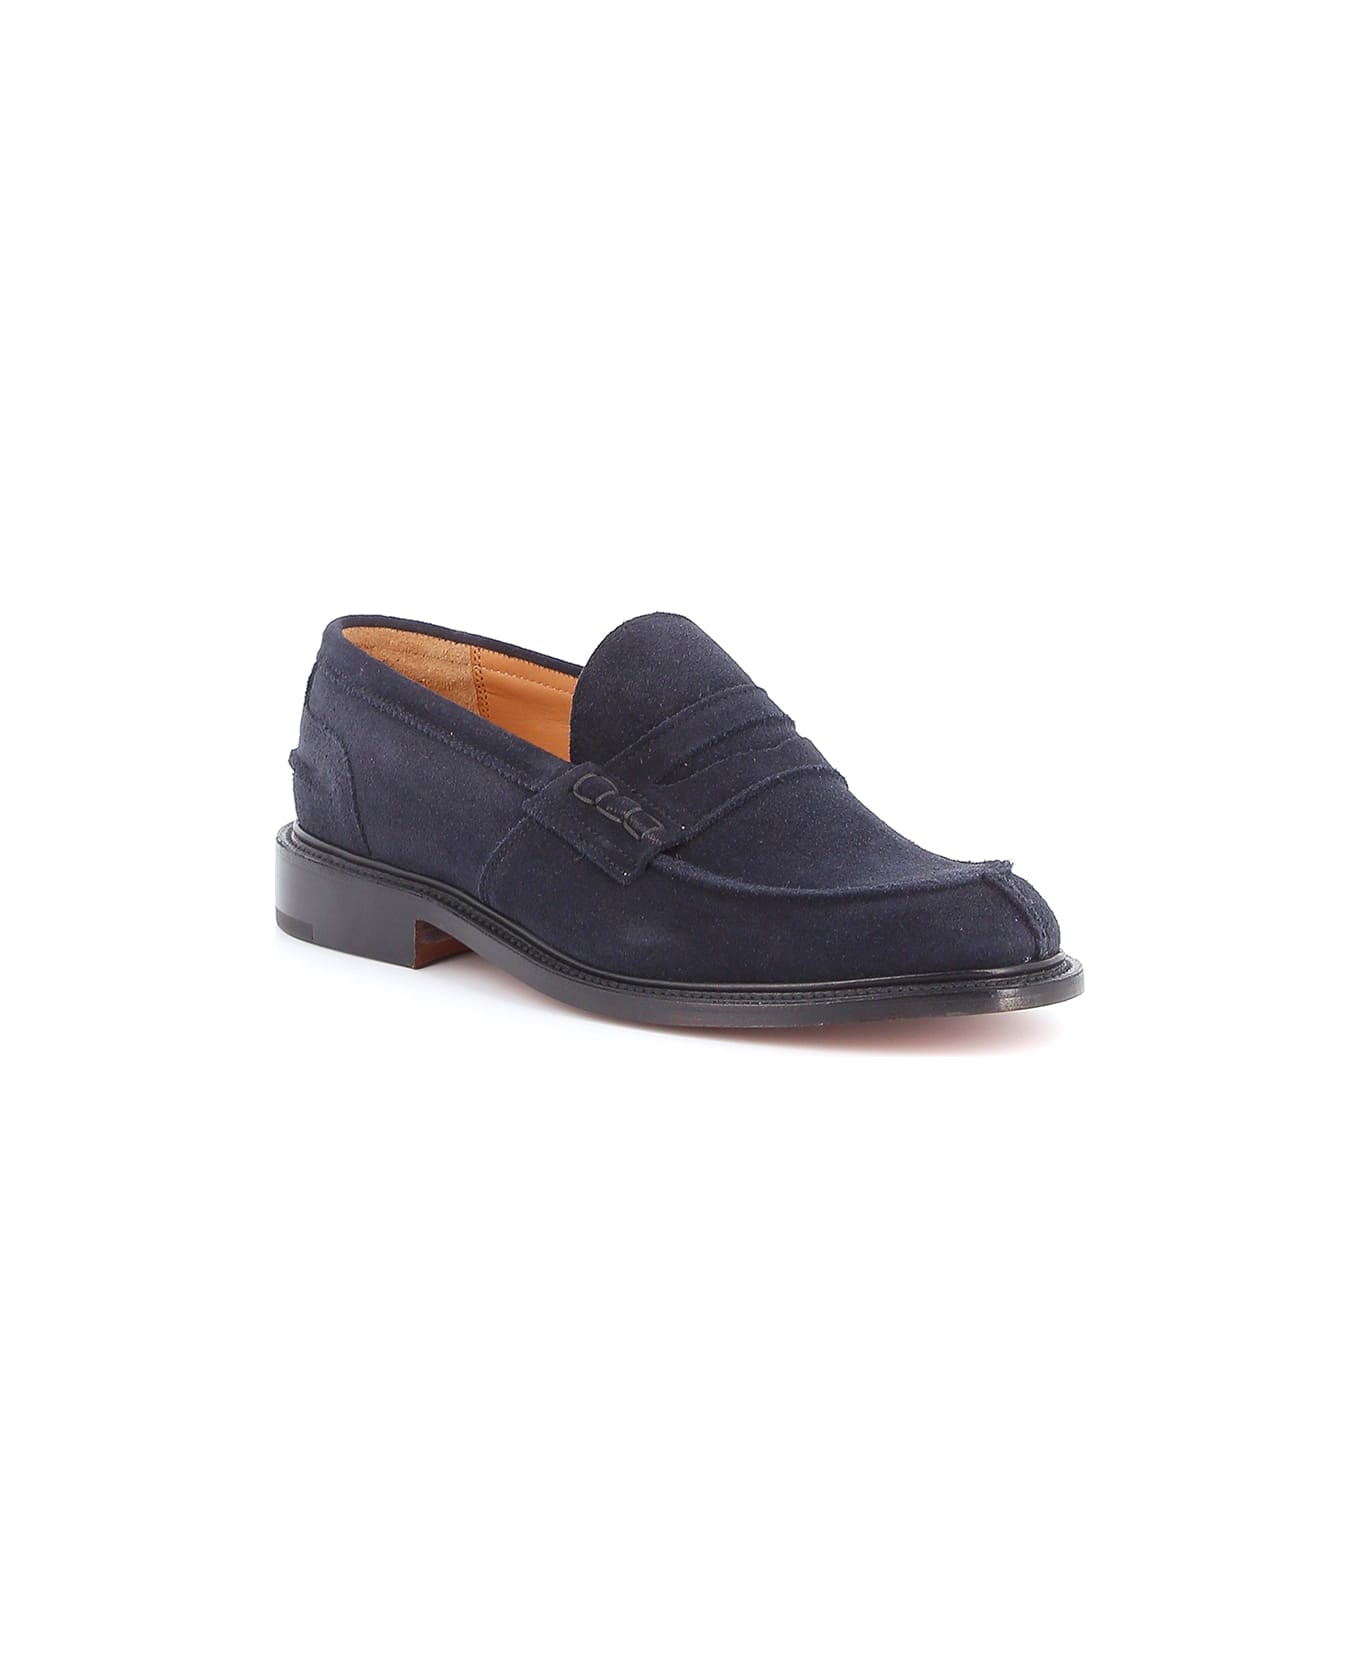 Tricker's James Penny Loafer Suede - Oceano ローファー＆デッキシューズ